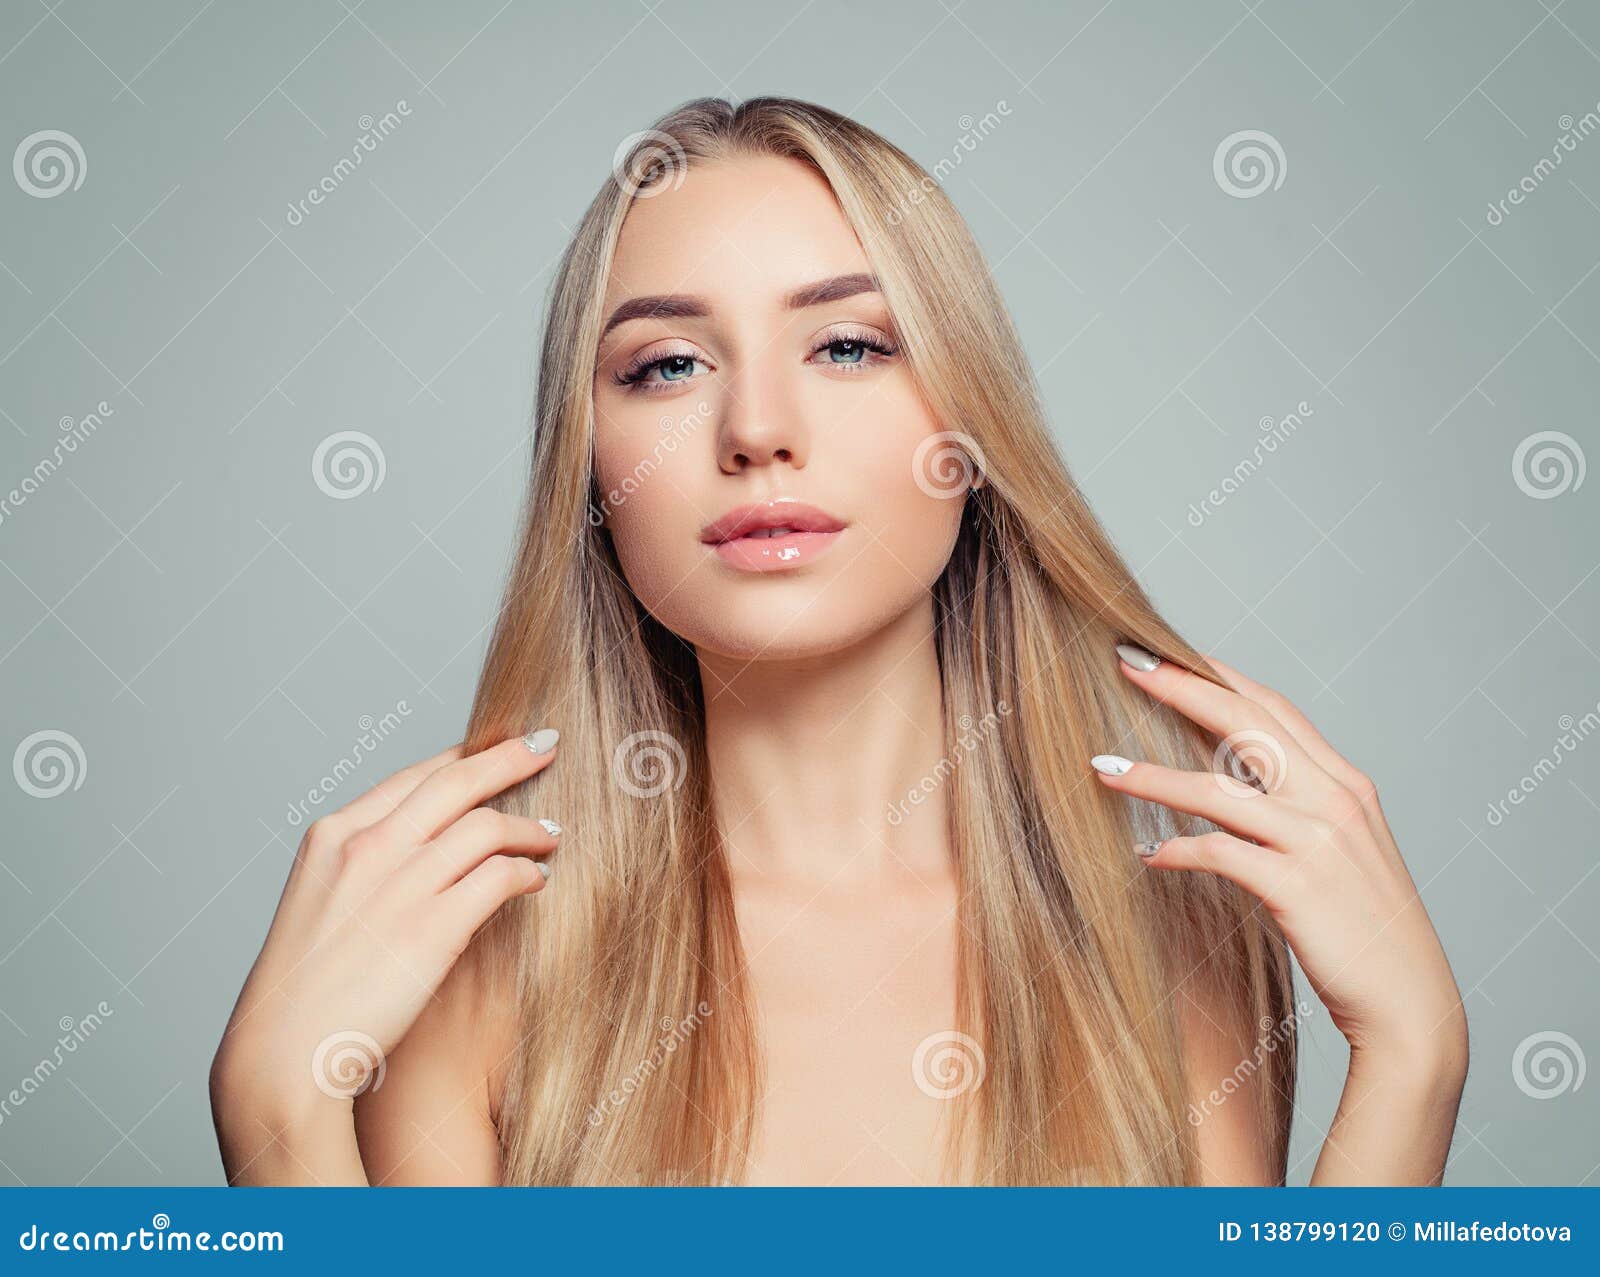 Blonde Hair Woman. Pretty Girl with Long Healthy and Perfect Skin, Beauty Stock Photo - Image of hairdo, hairstyle: 138799120